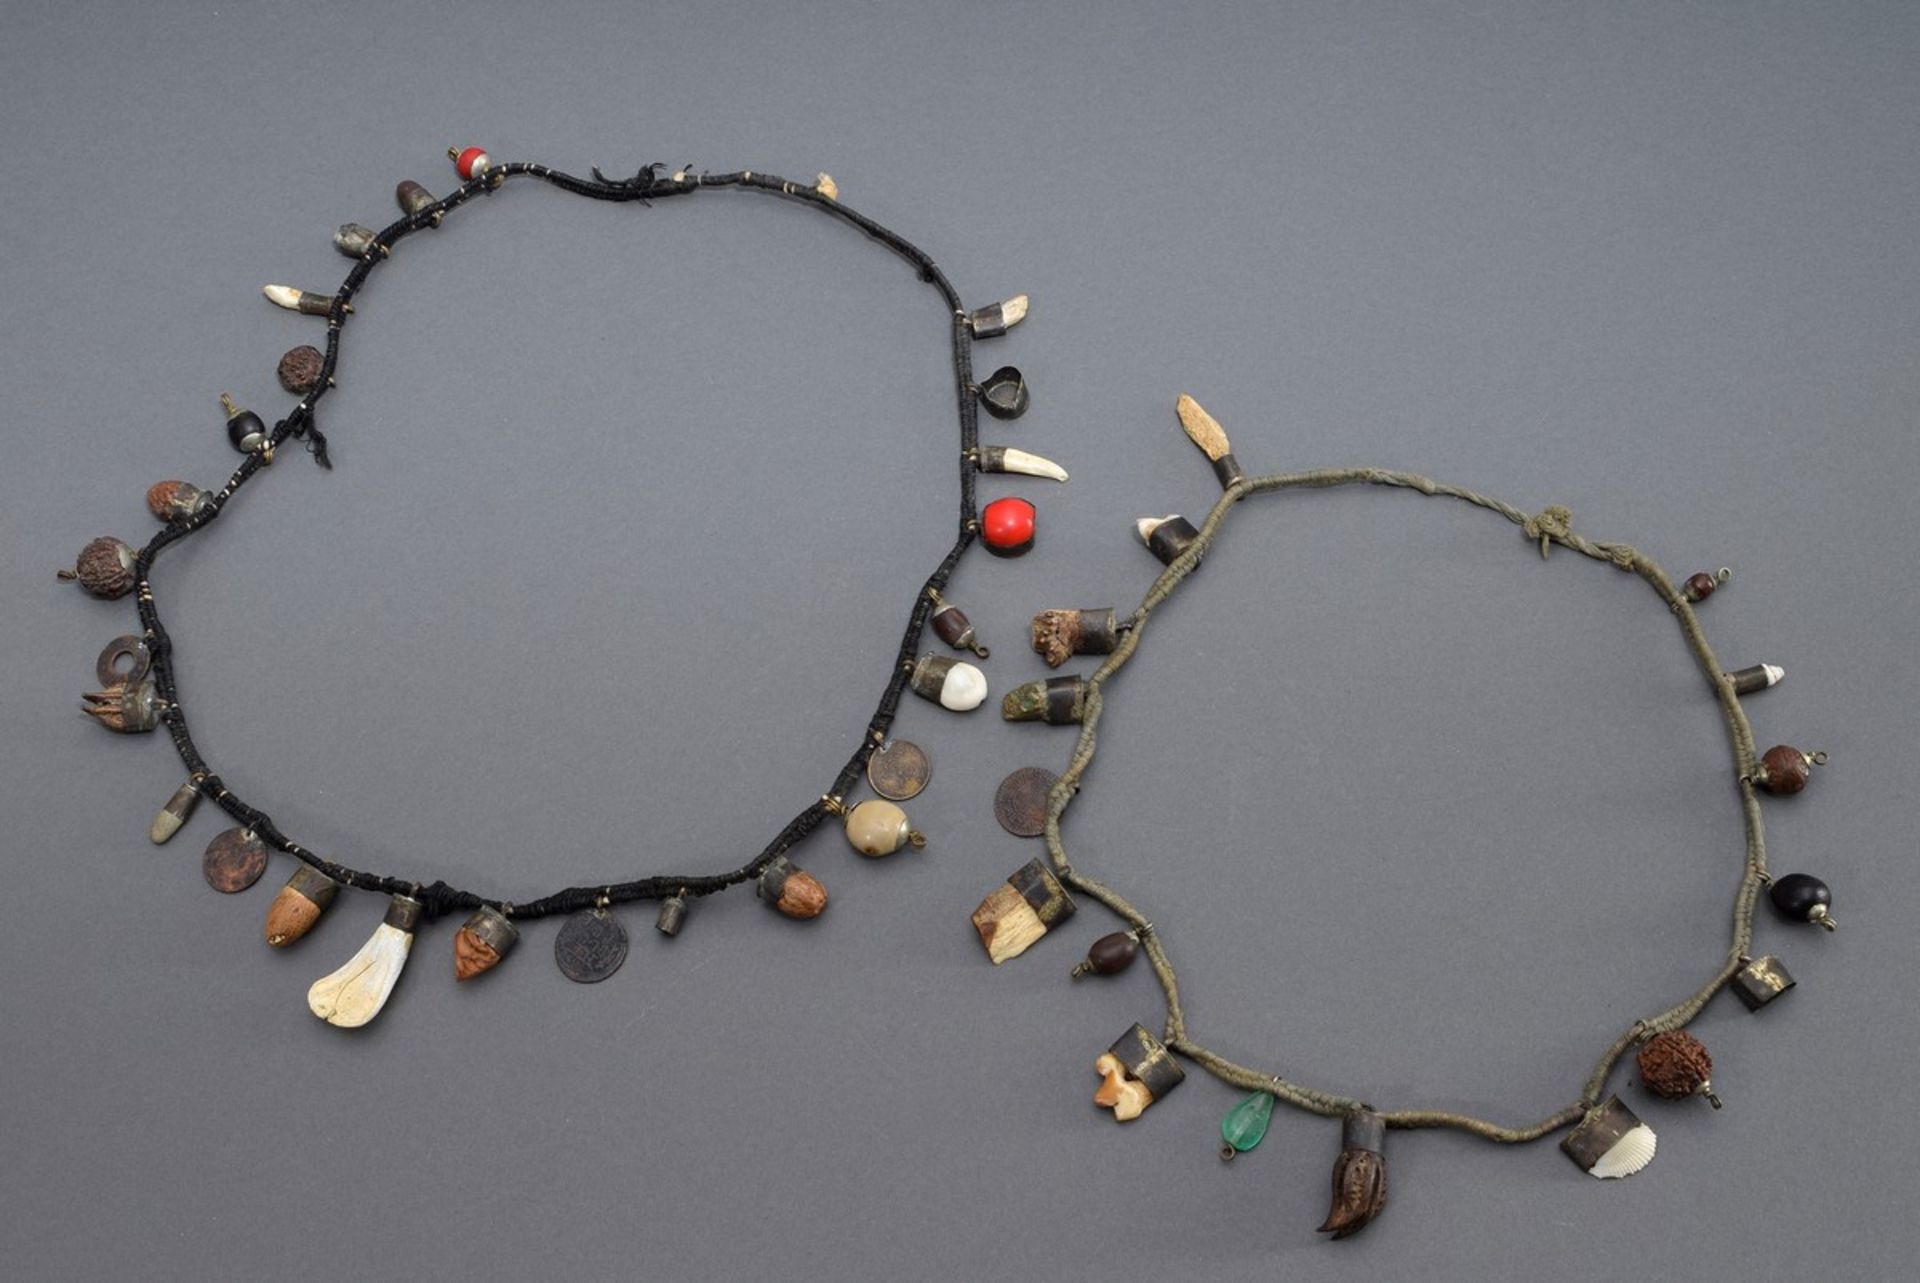 2 various Fraisen chains with different individual amulets made of bones, kernels, shells, minerals - Image 2 of 5